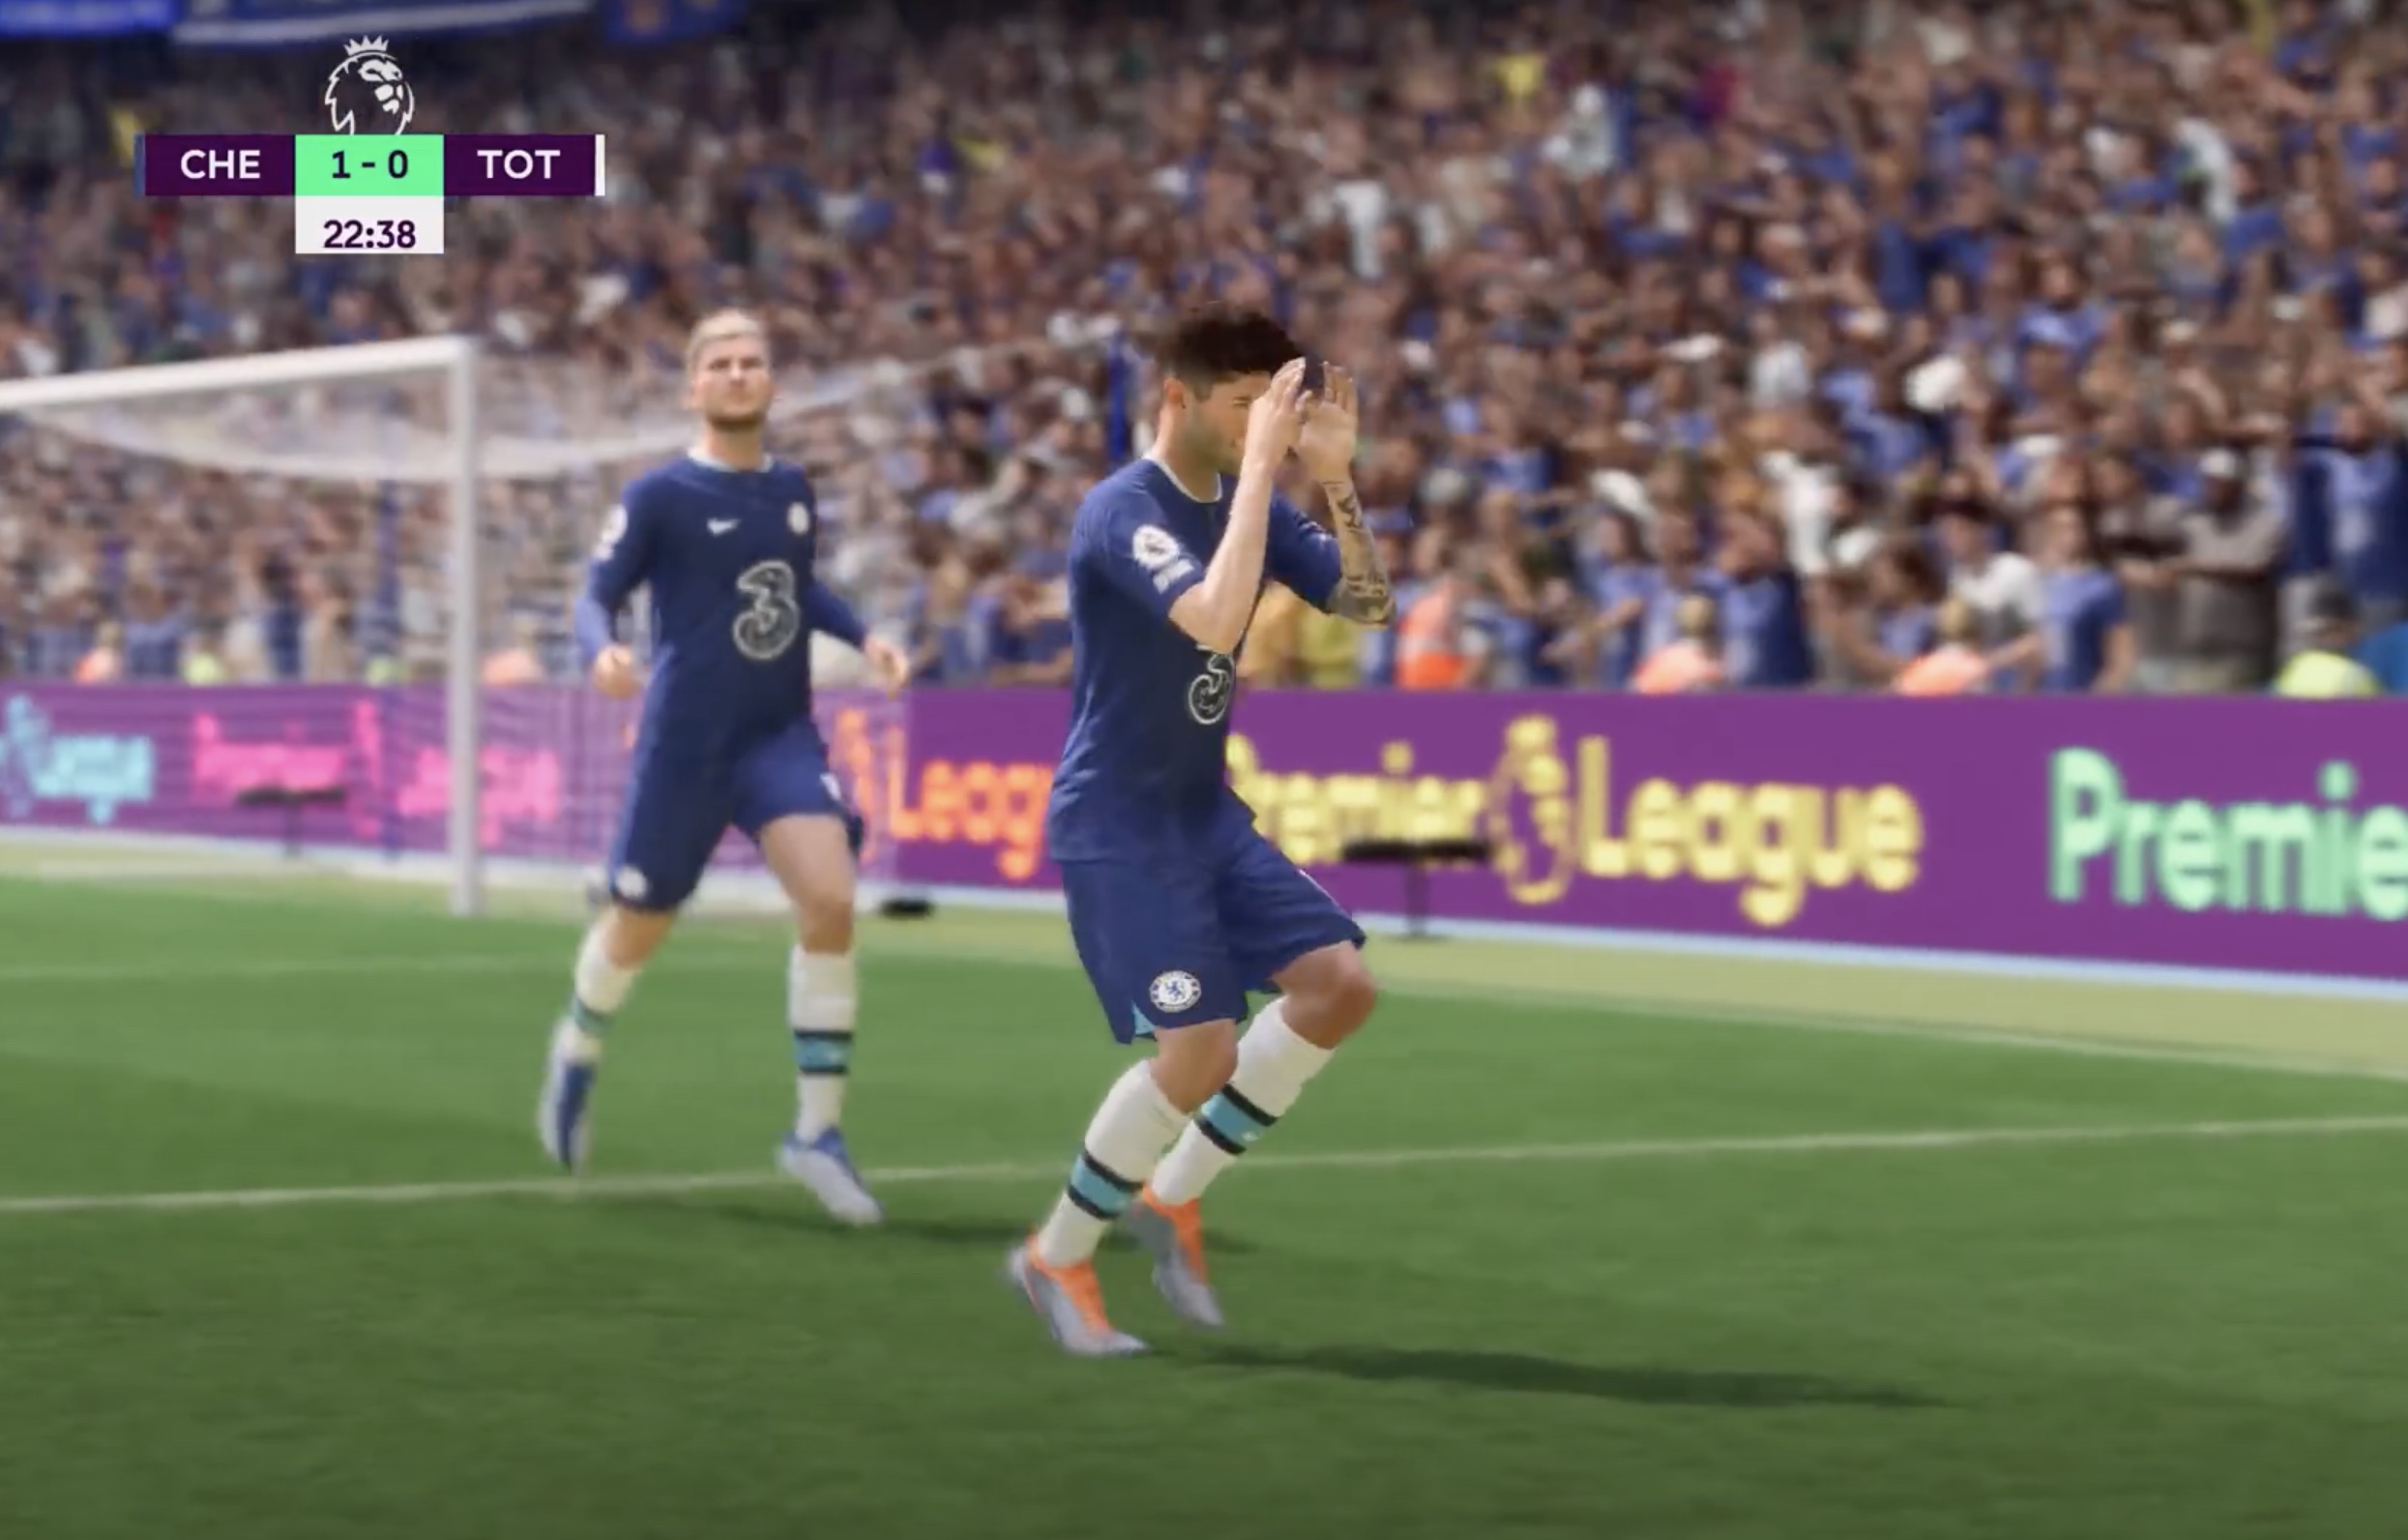 FIFA 23 Best Camera Settings - Your Games Tracker